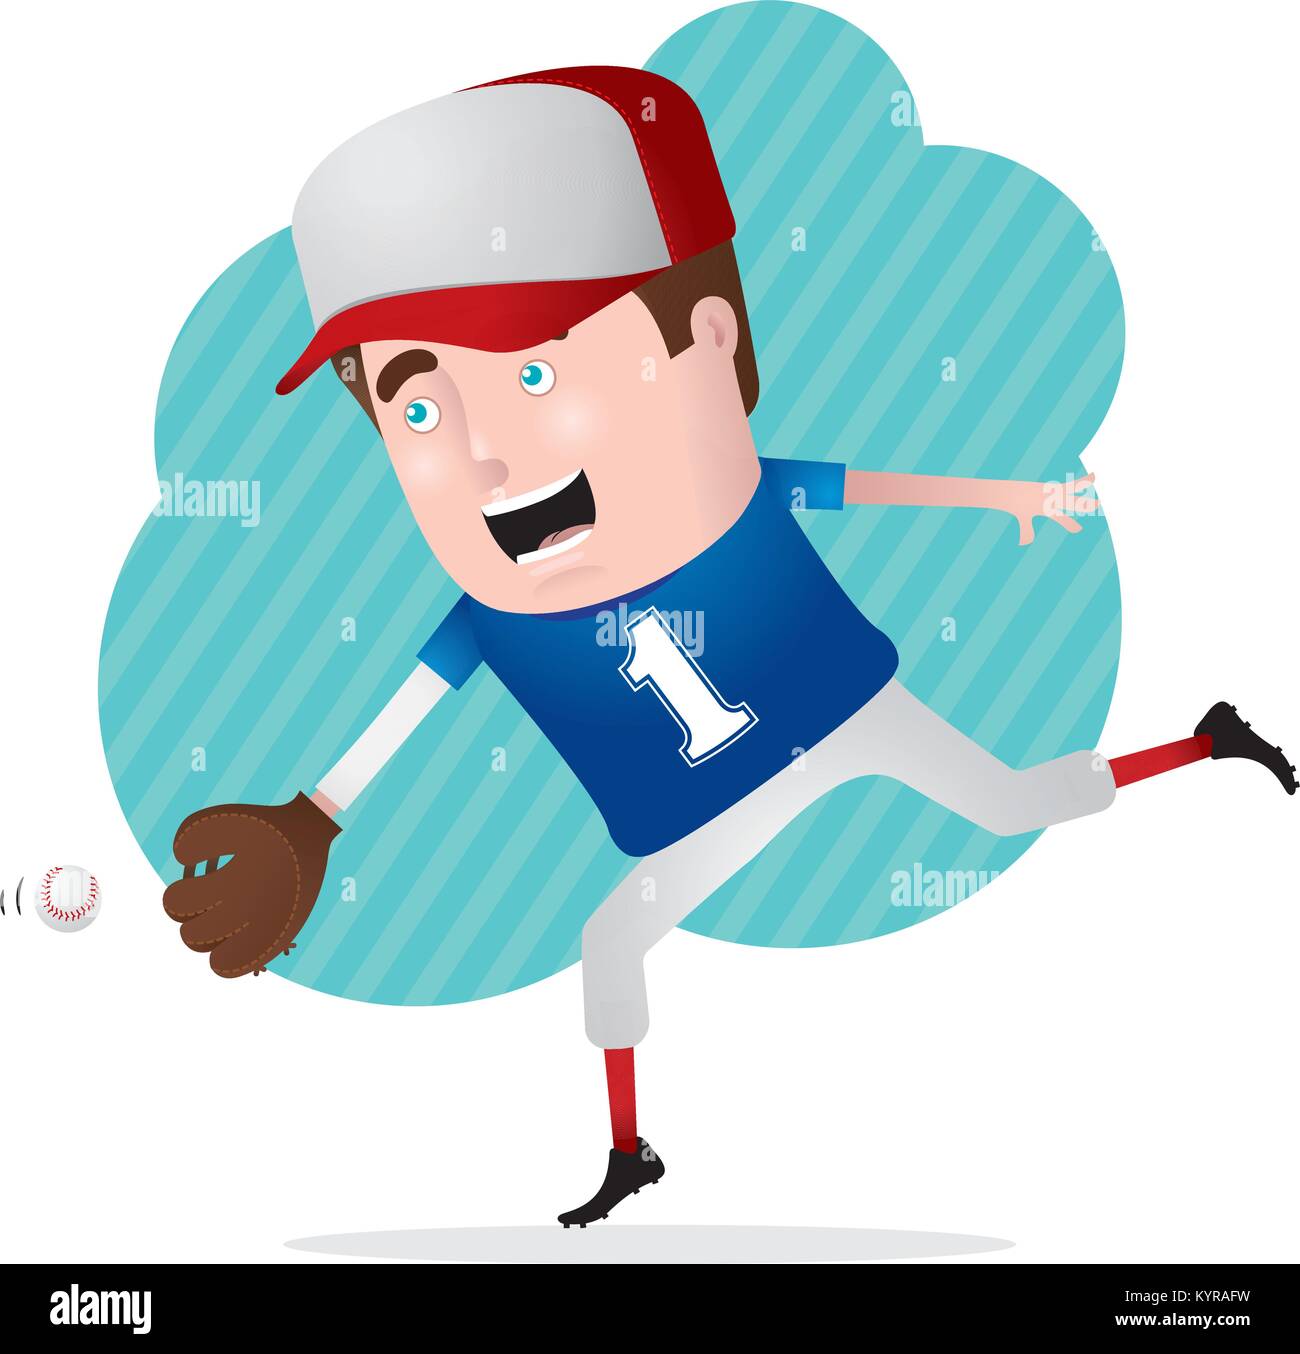 A confident professional baseball player jumping to catch the ball. Vector illustration. Stock Vector